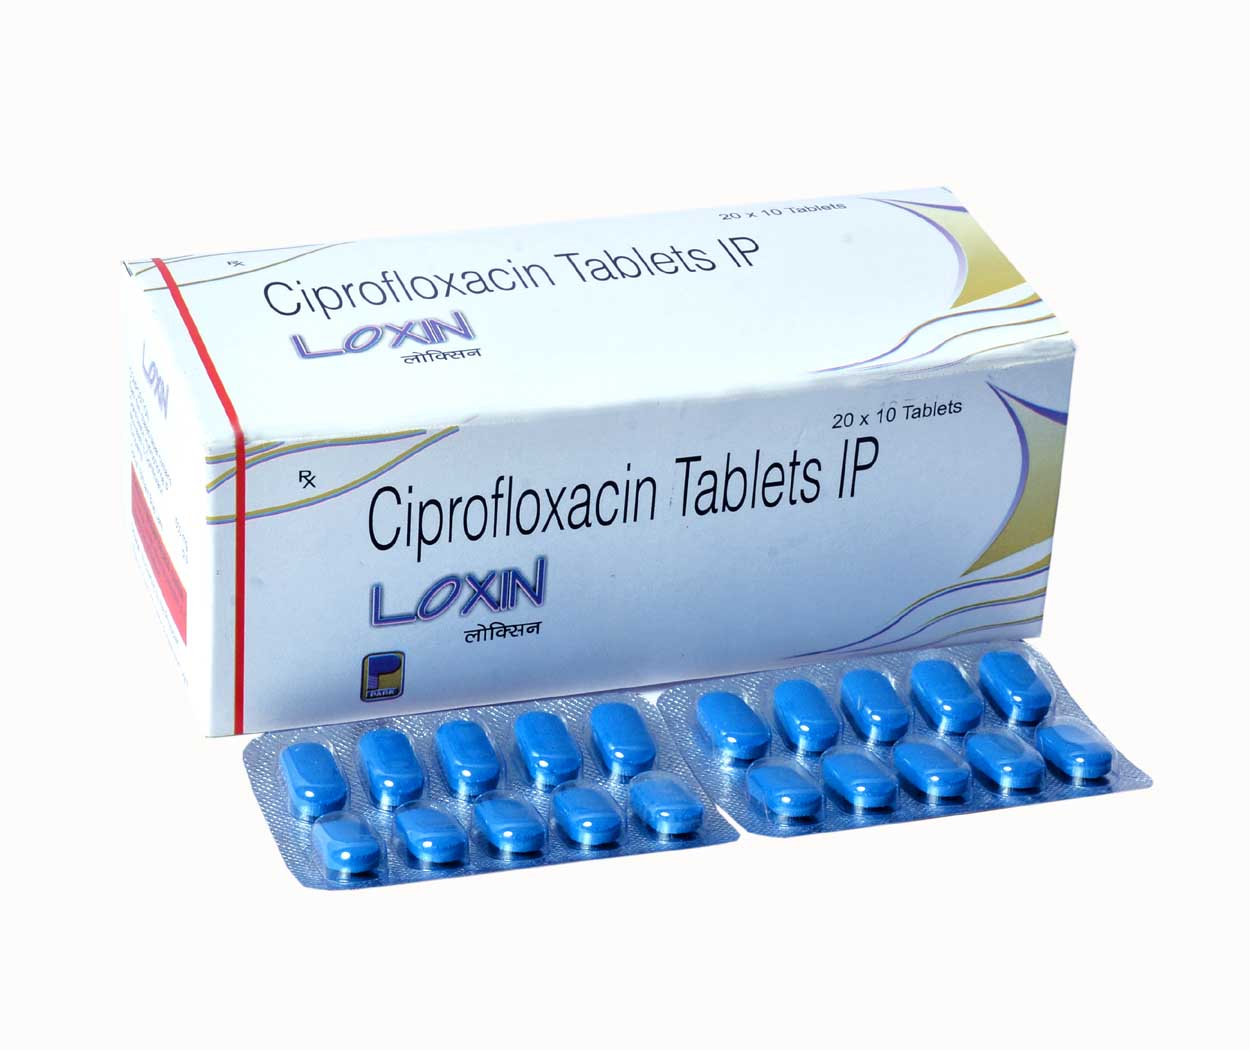 Product Name: LOXIN, Compositions of LOXIN are Ciprofloxacin Tablets IP - Park Pharmaceuticals